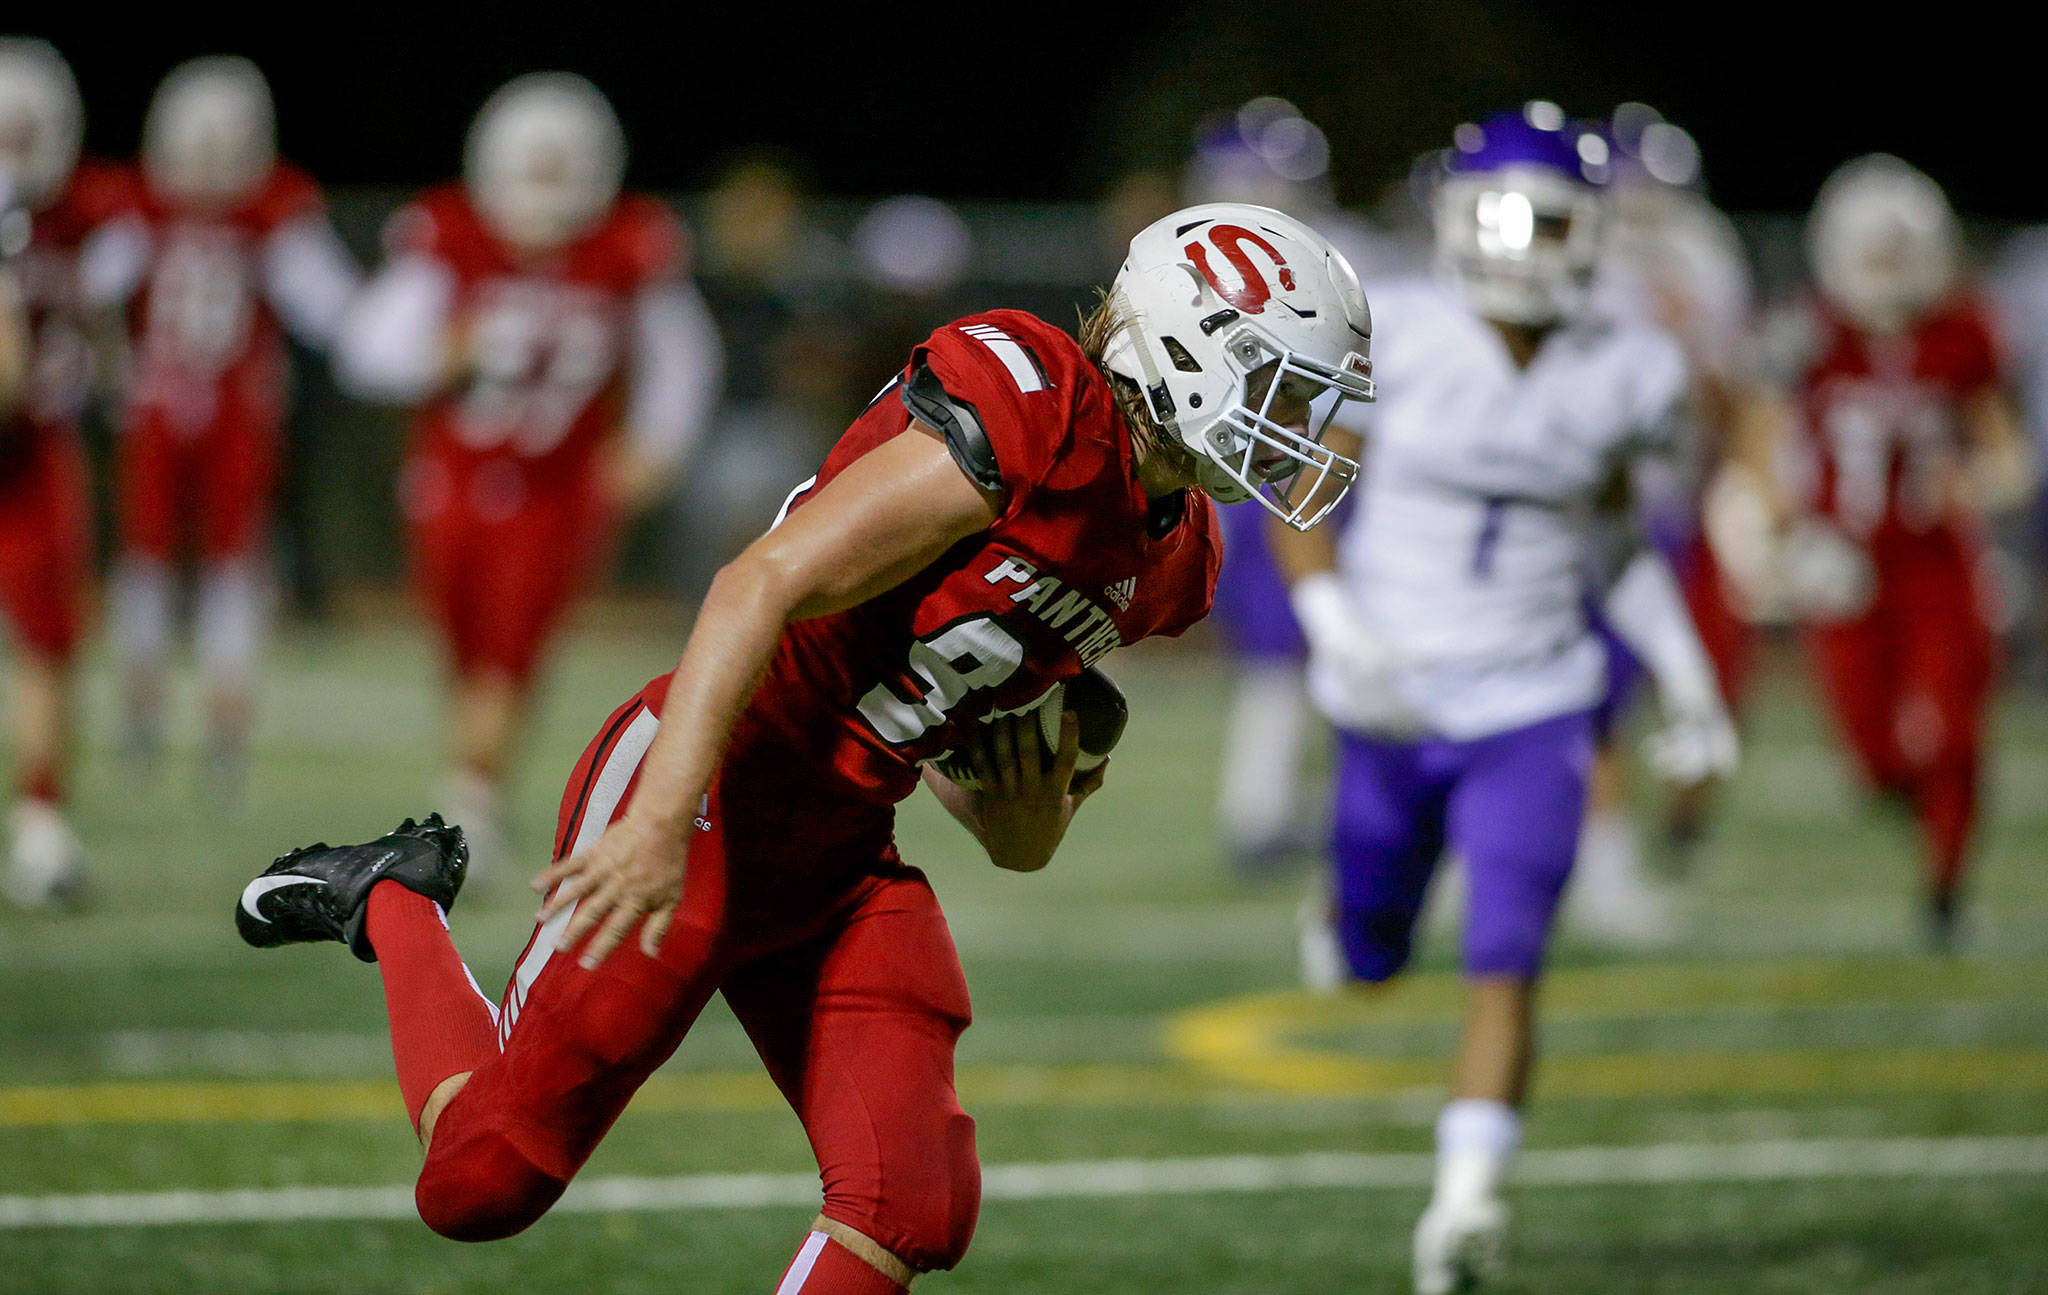 Snohomish’s Noah Dunham hauls in a pass for a touchdown during a Week 10 playoff game against Garfield on Nov. 2, 2018, at Veterans Memorial Stadium in Snohomish. Snohomish won 42-35. (Andy Bronson / The Herald)